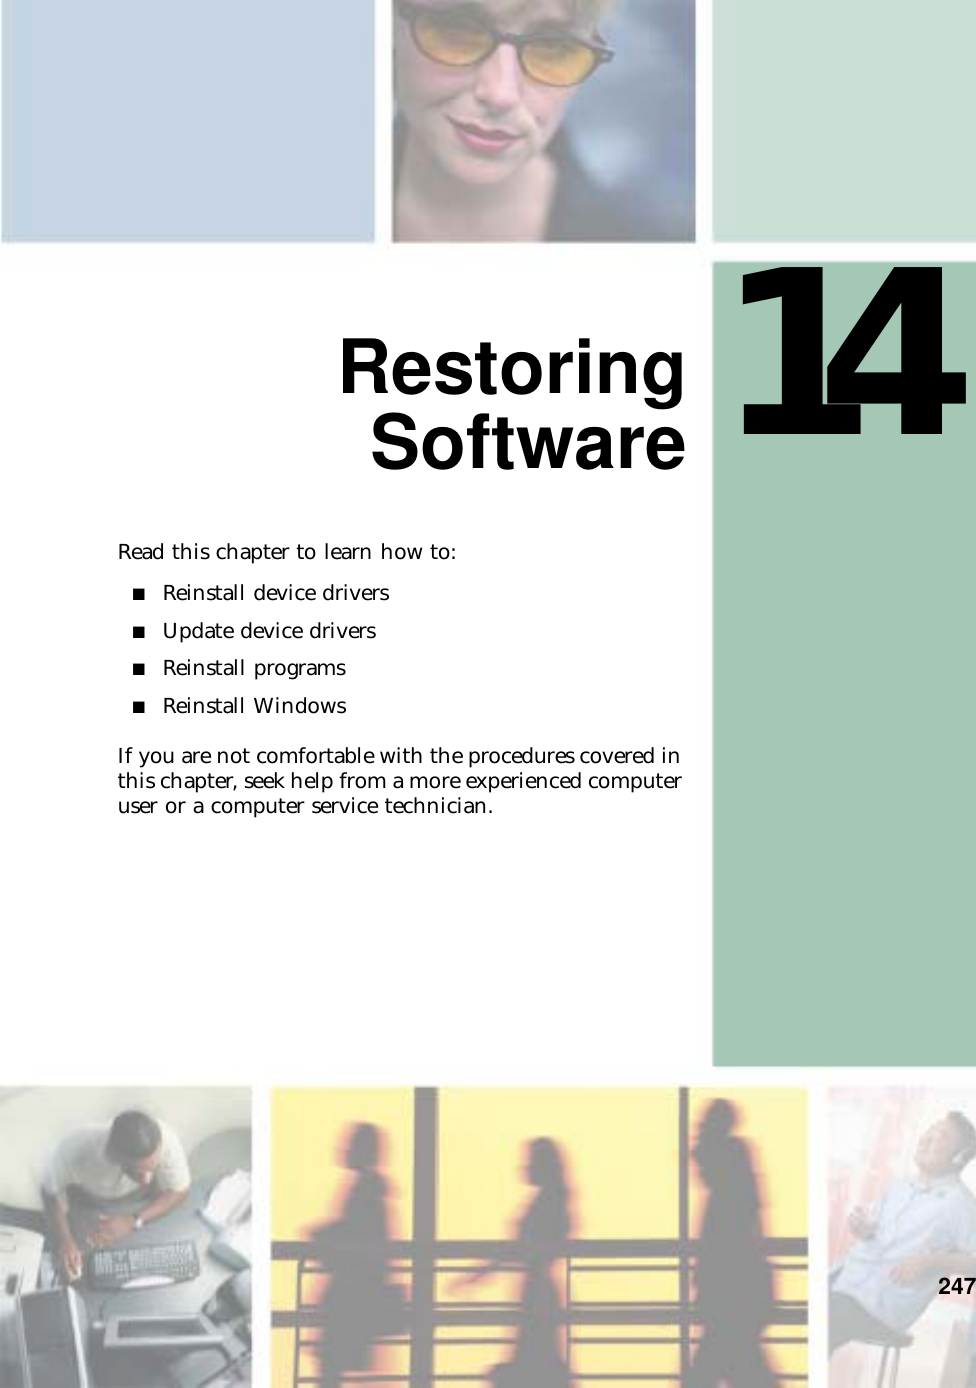 14247RestoringSoftwareRead this chapter to learn how to:■Reinstall device drivers■Update device drivers■Reinstall programs■Reinstall WindowsIf you are not comfortable with the procedures covered in this chapter, seek help from a more experienced computer user or a computer service technician.